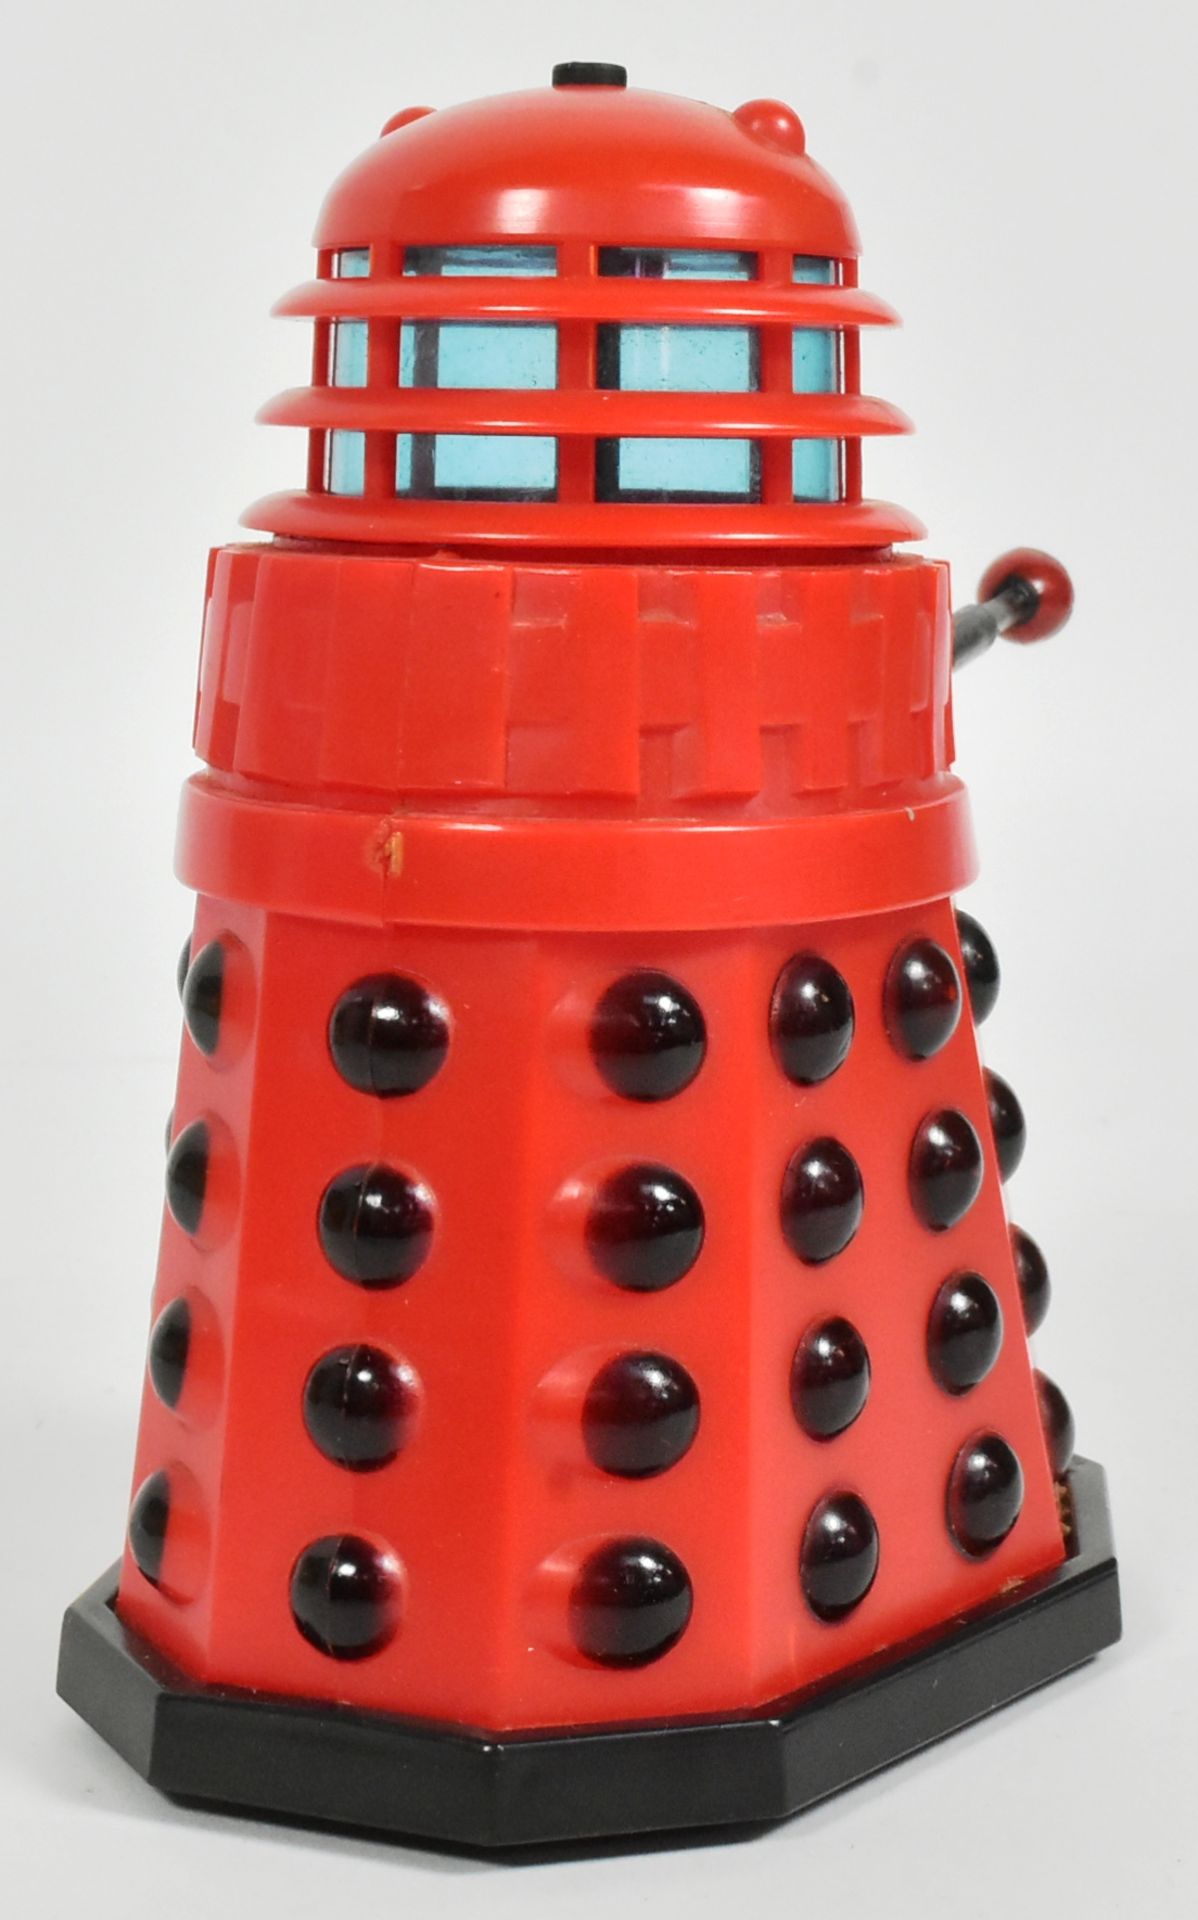 DOCTOR WHO - VINTAGE BBC TALKING DALEK TOY BY PALITOY - Image 4 of 6